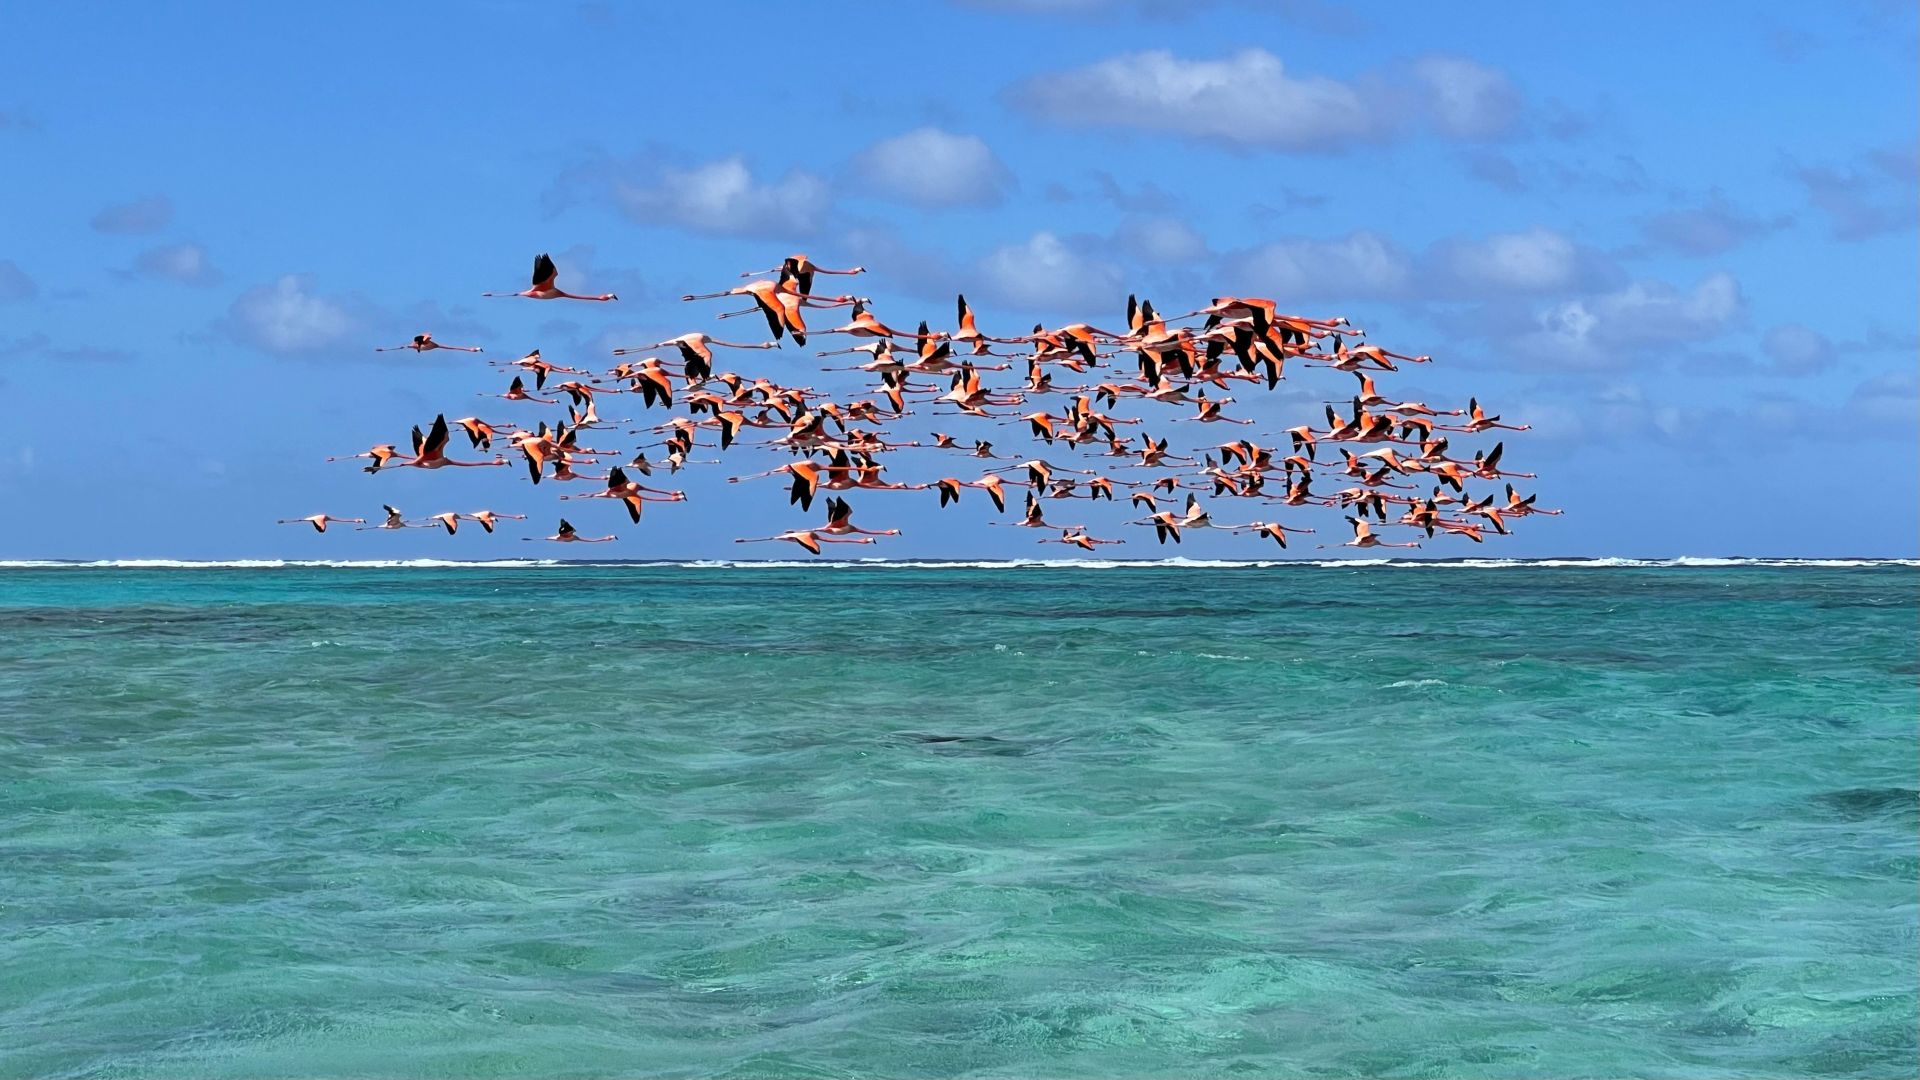 A Flock Of Seagulls Flying Around In The Ocean